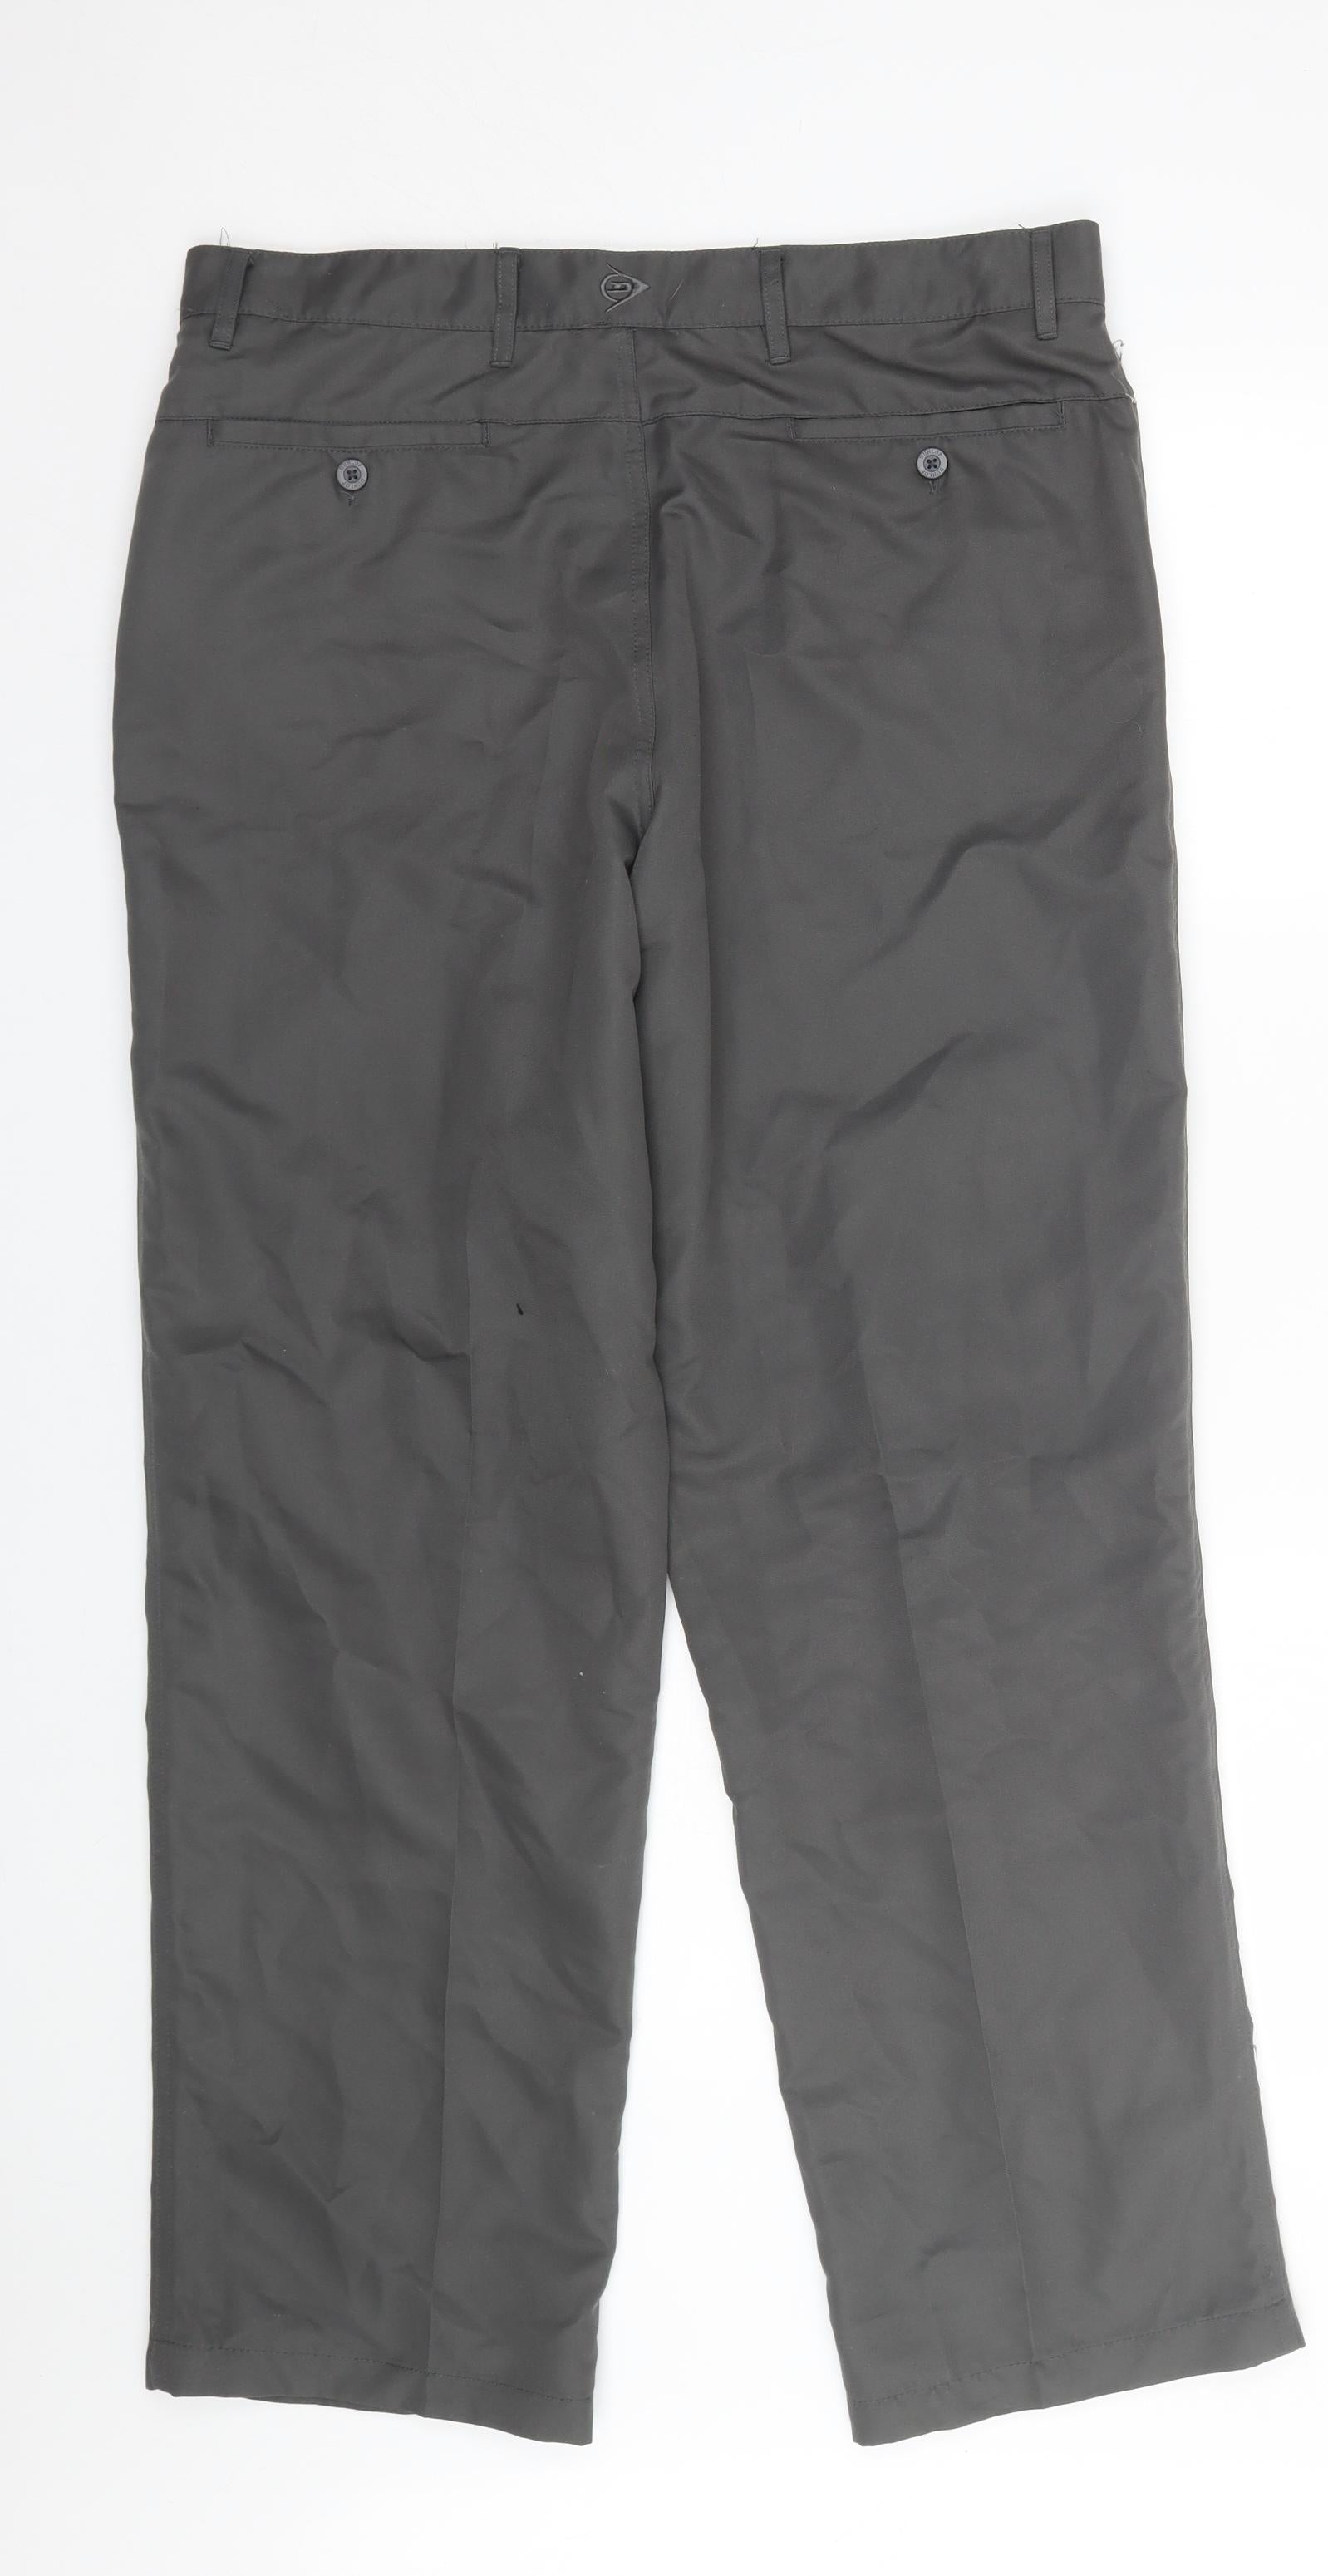 Y2K Hippie Streetwear Pants With Oversized Pockets For Men And Women  Harajuku Techwear Wide Pantne Style Dunlop Work Trousers T230928 From  Louis_vc_store, $7.48 | DHgate.Com